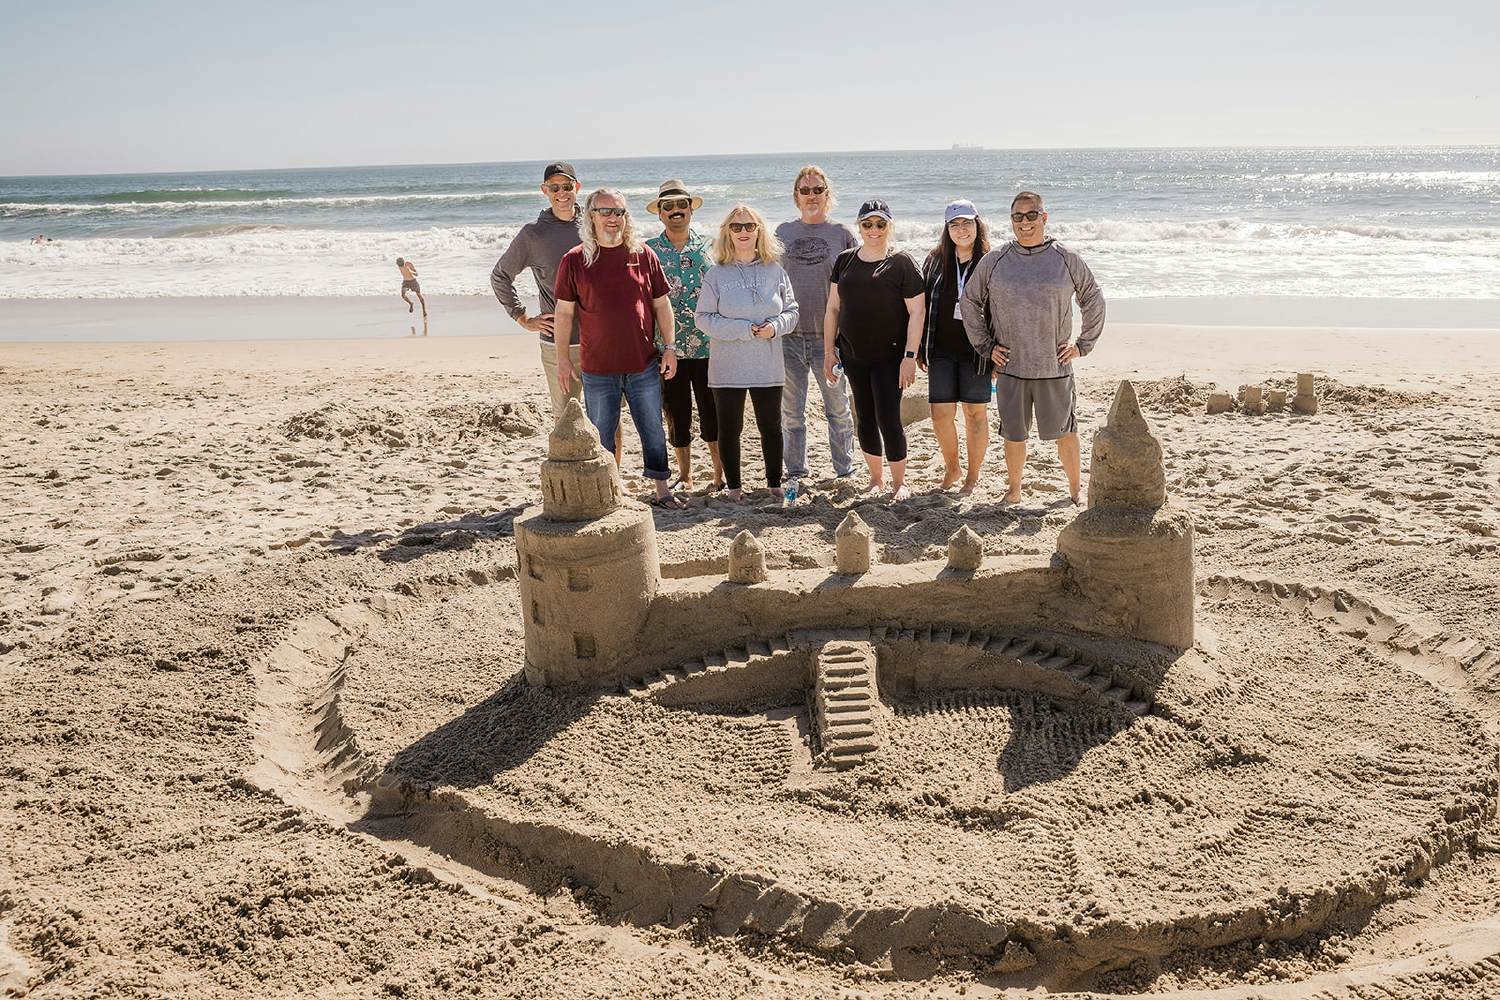 Sandcastle Building Event: With no physical offices, we meet throughout the year to build connections and have fun.